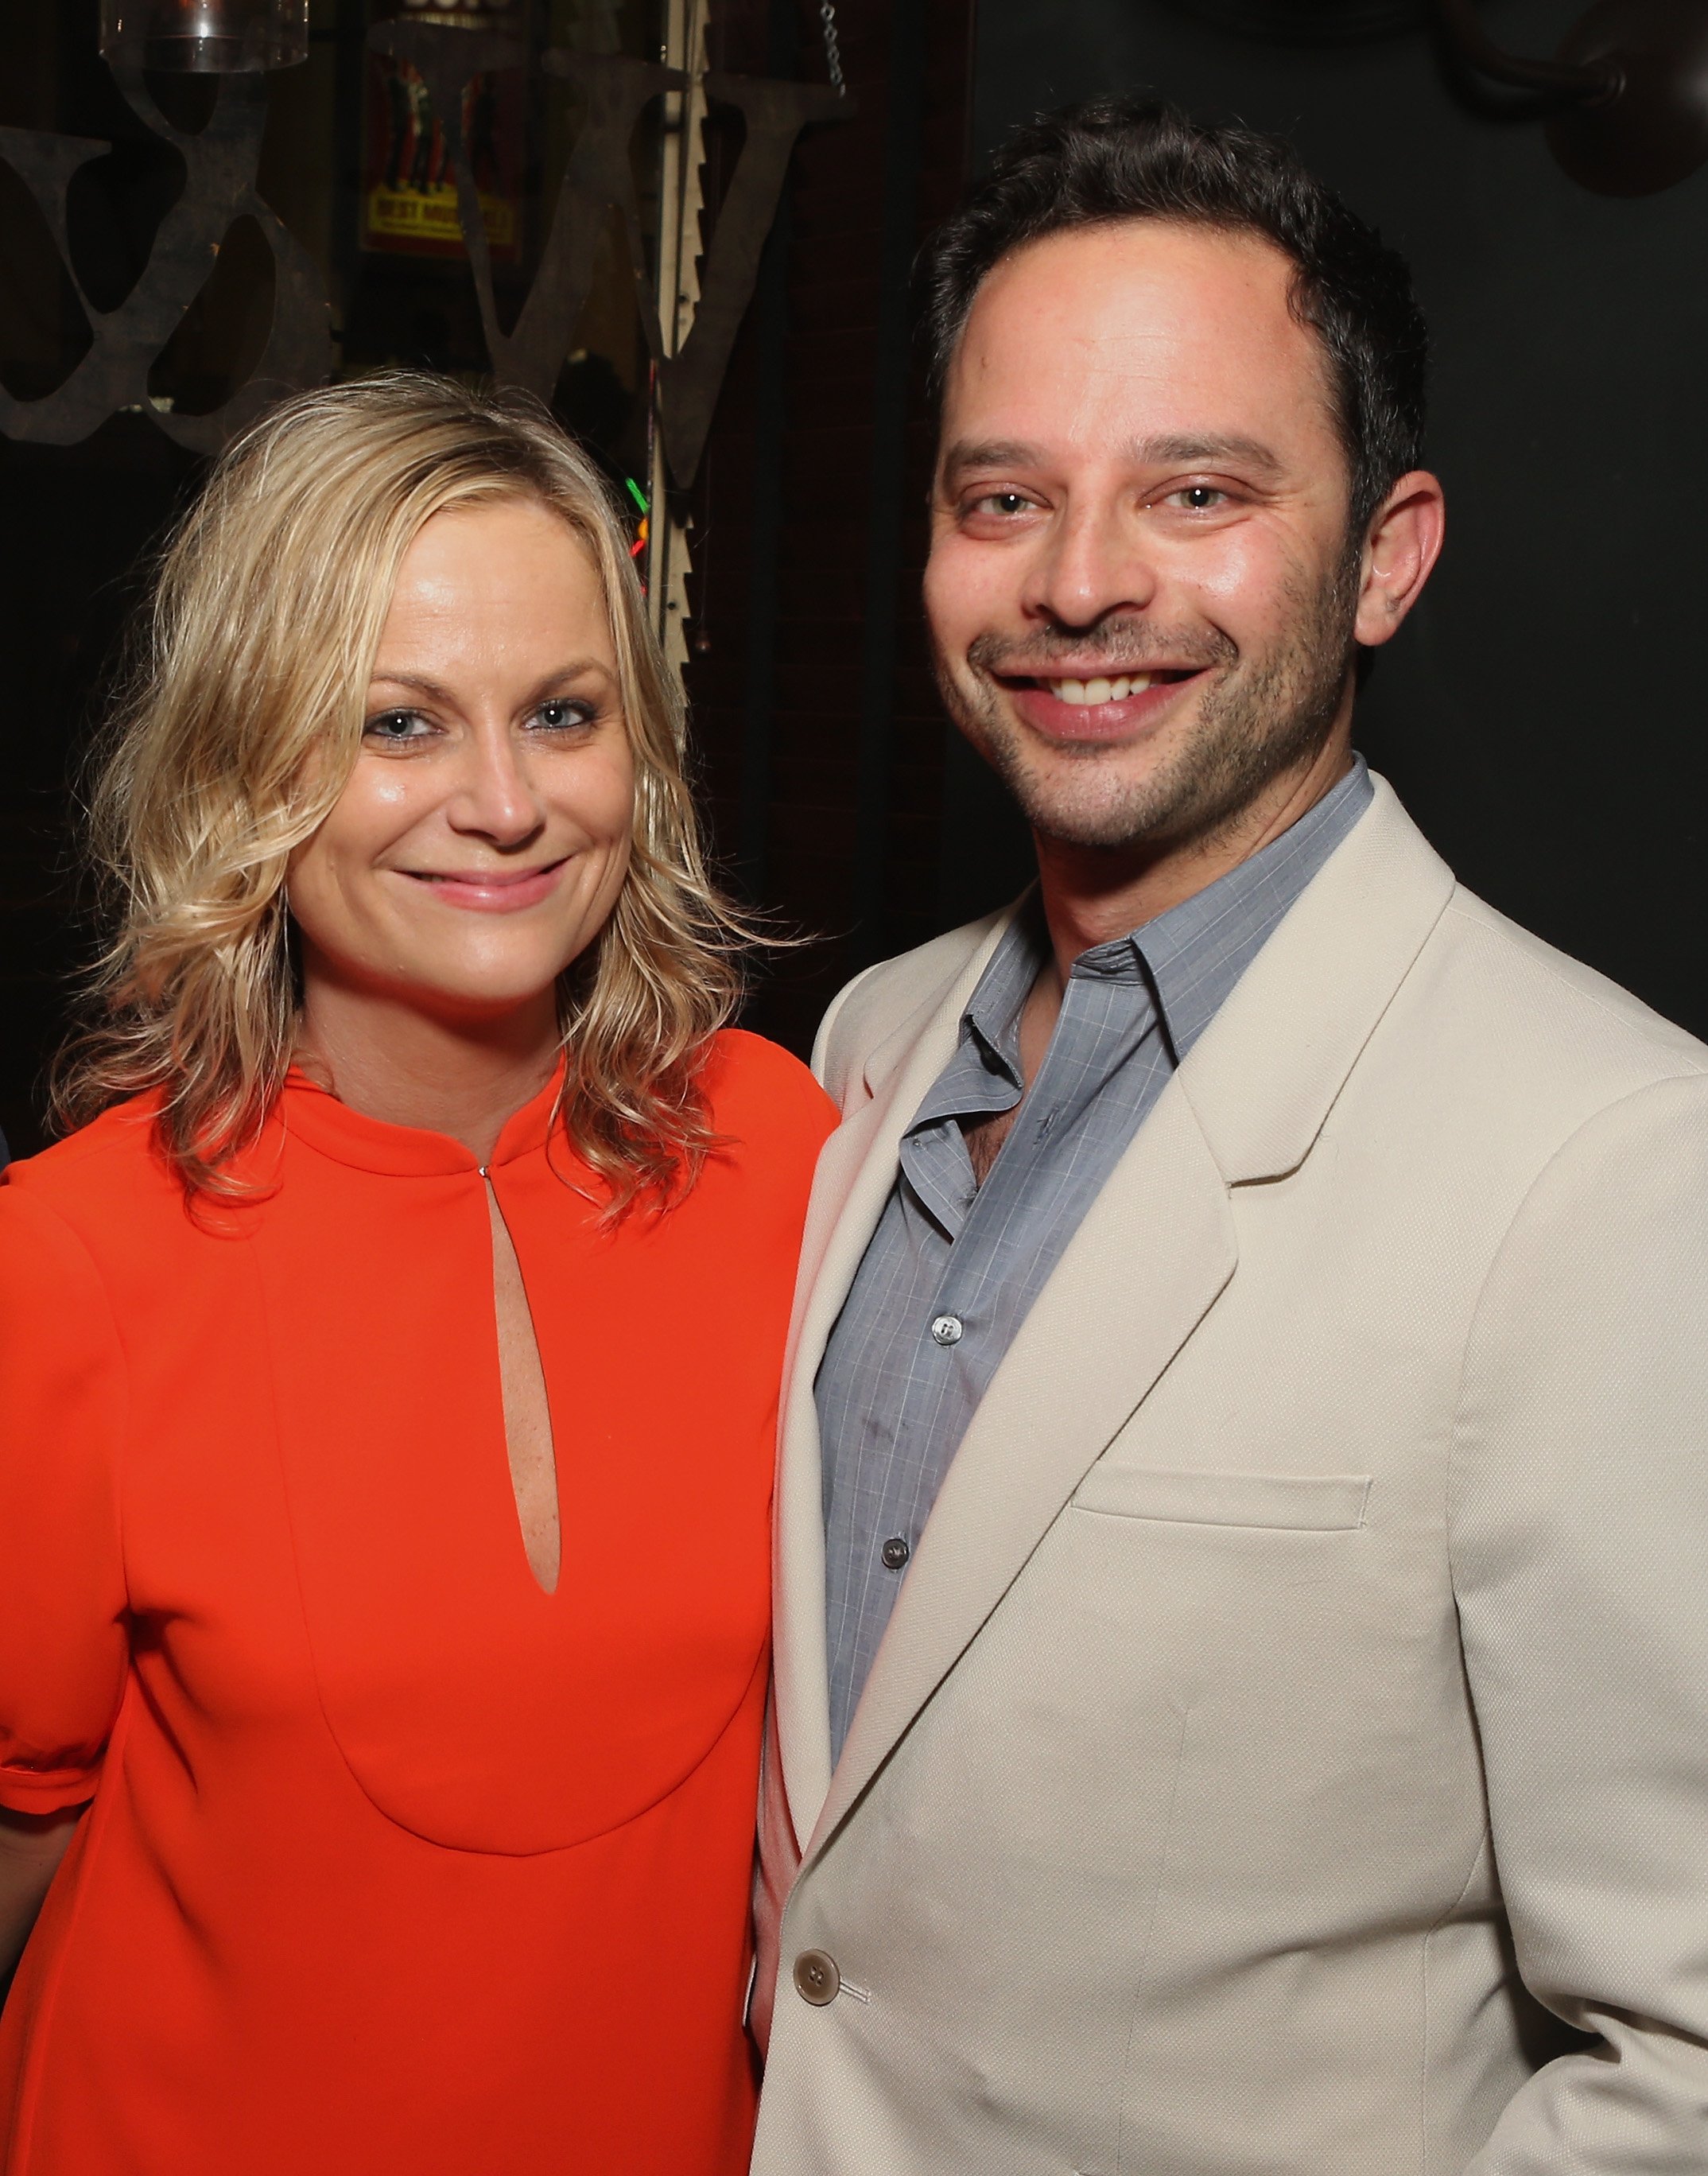 Amy Poehler and Nick Kroll attend the Screening of A24's "Obvious Child" after-party at Wood & Vine on June 5, 2014, in Hollywood, California. | Source: Getty Images